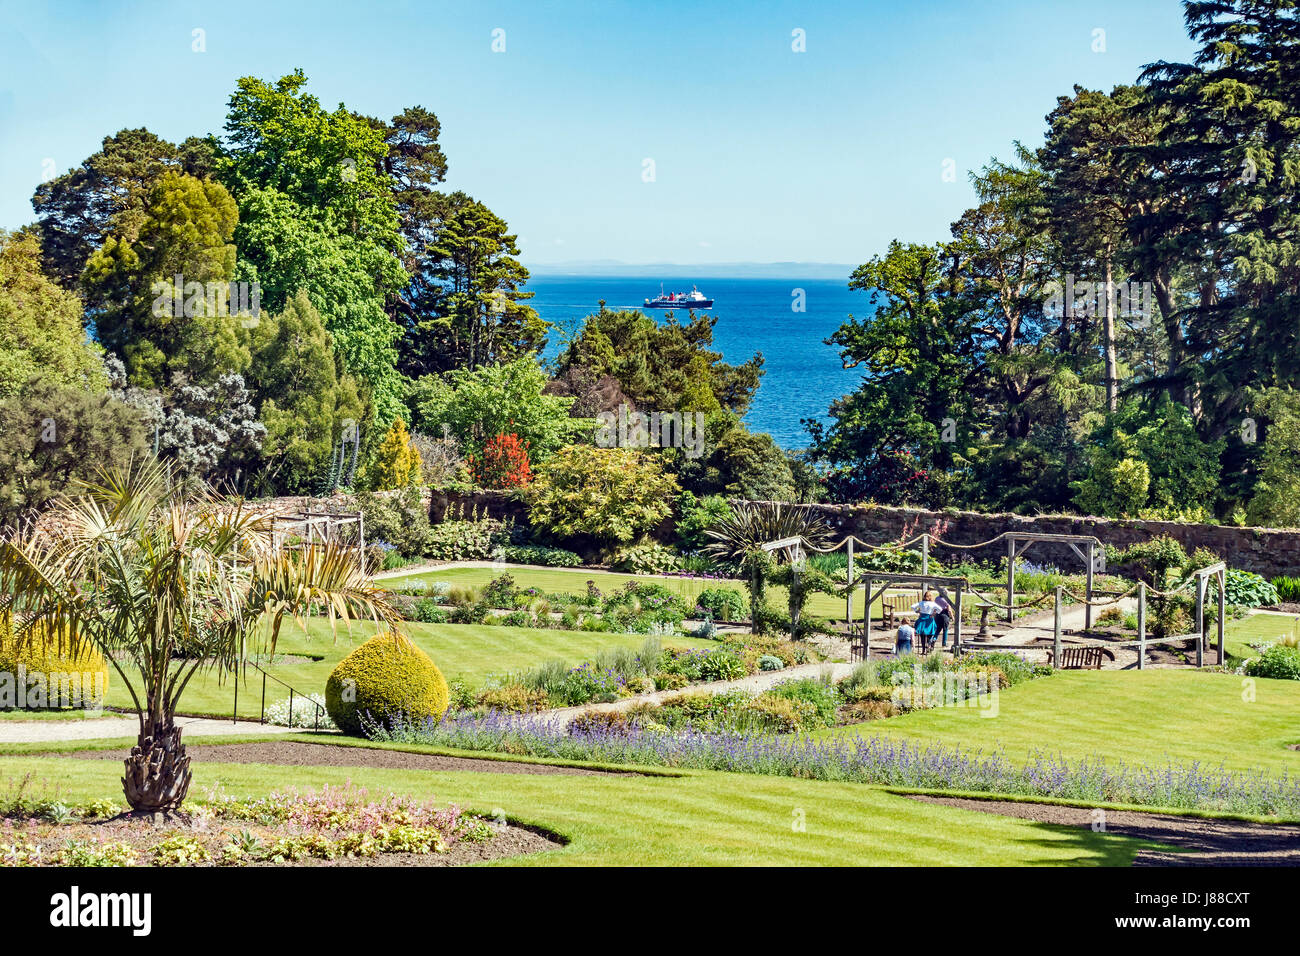 Walled garden at Brodick Castle Garden and Country Park above Brodick Bay on Scottish Island Arran in North Ayrshire Scotland UK Stock Photo